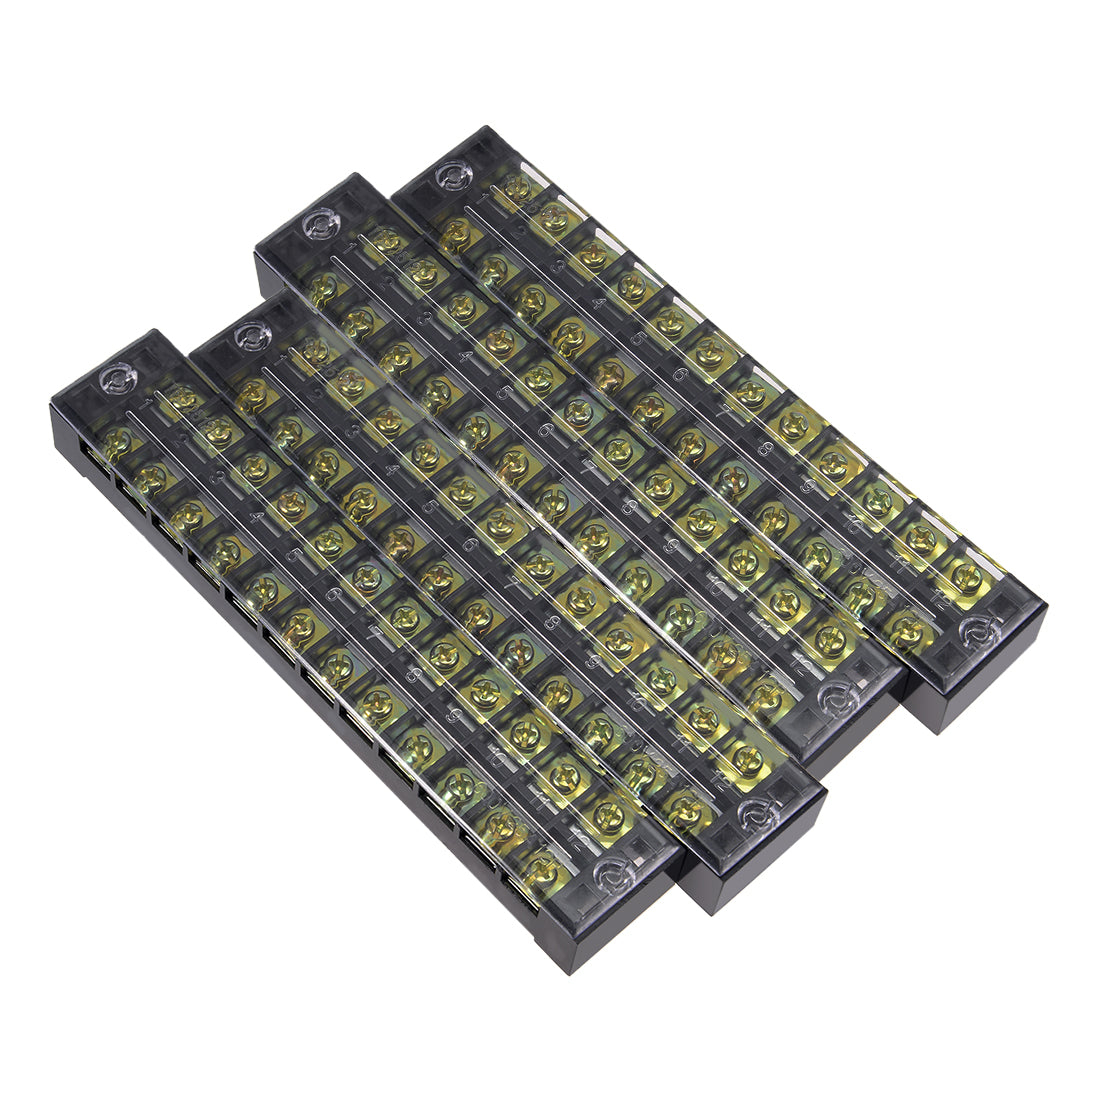 uxcell Uxcell 4 Pcs 12 Positions Dual Rows 600V 25A Cable Barrier Block Terminal Strip TB-2512L